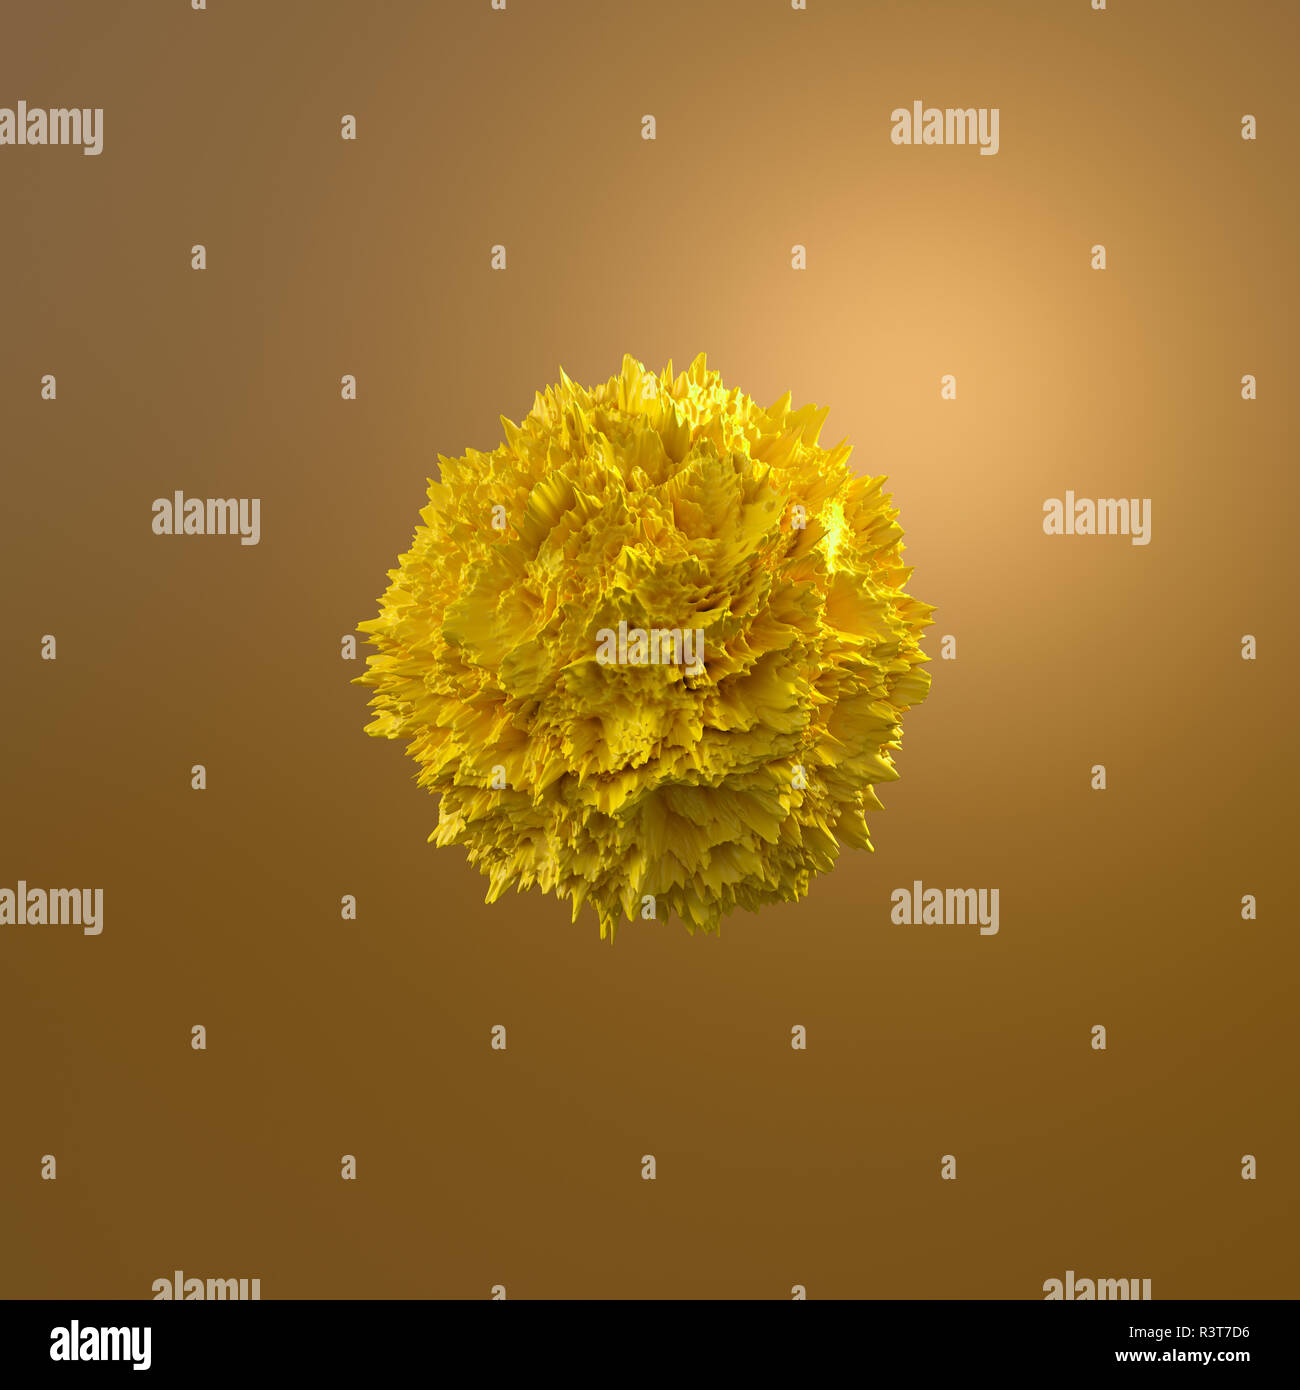 3D Rendering, Yellow molecule against brown background Stock Photo